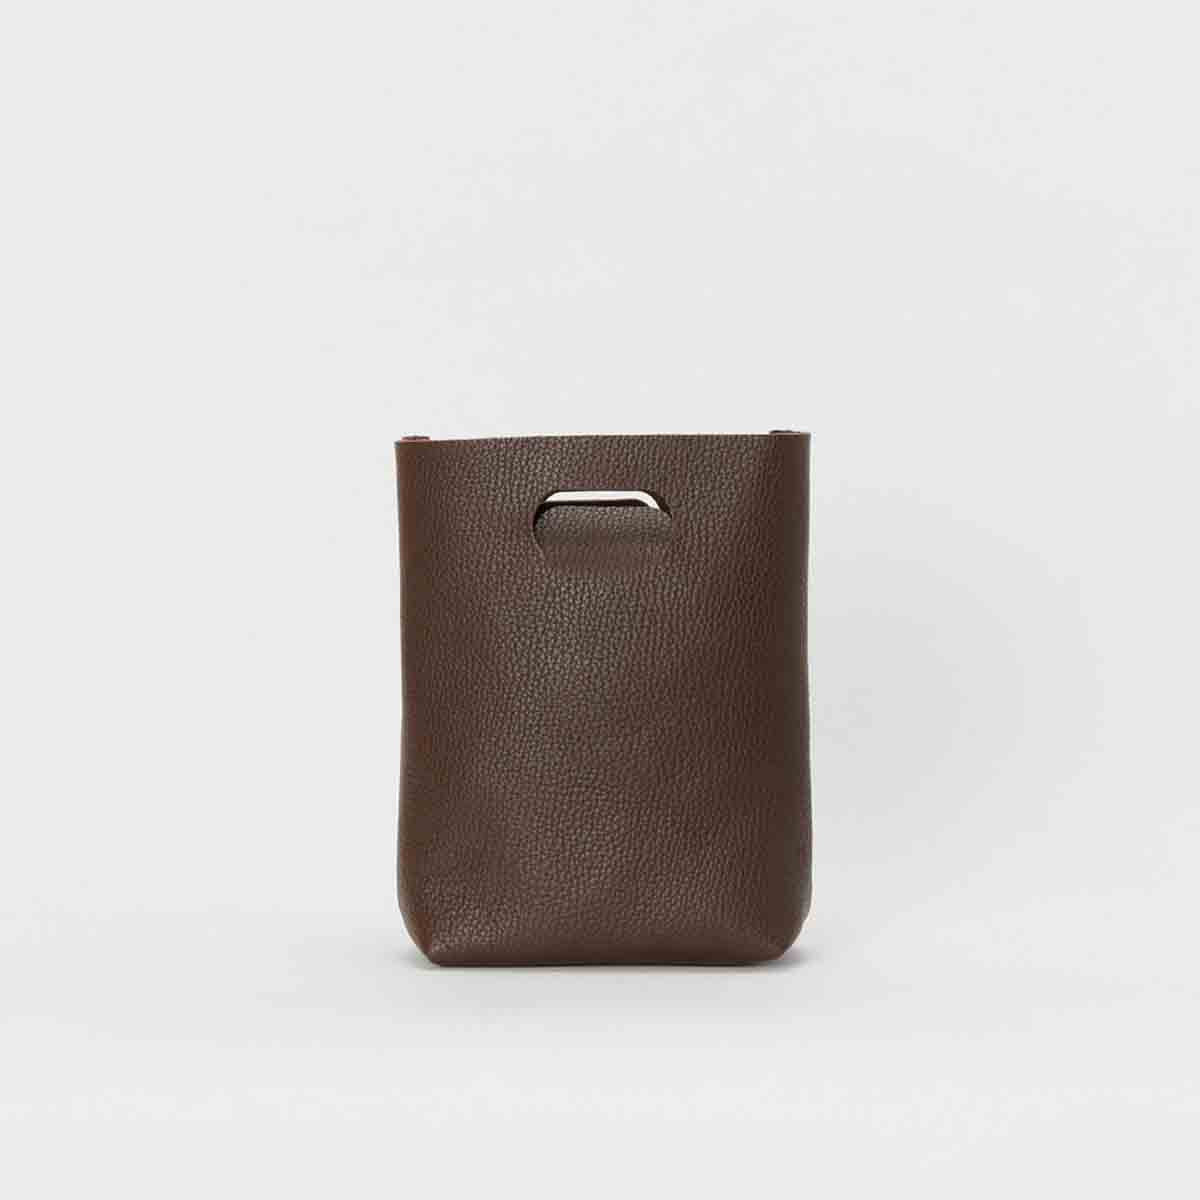 Hender Scheme not eco bag small – unexpected store